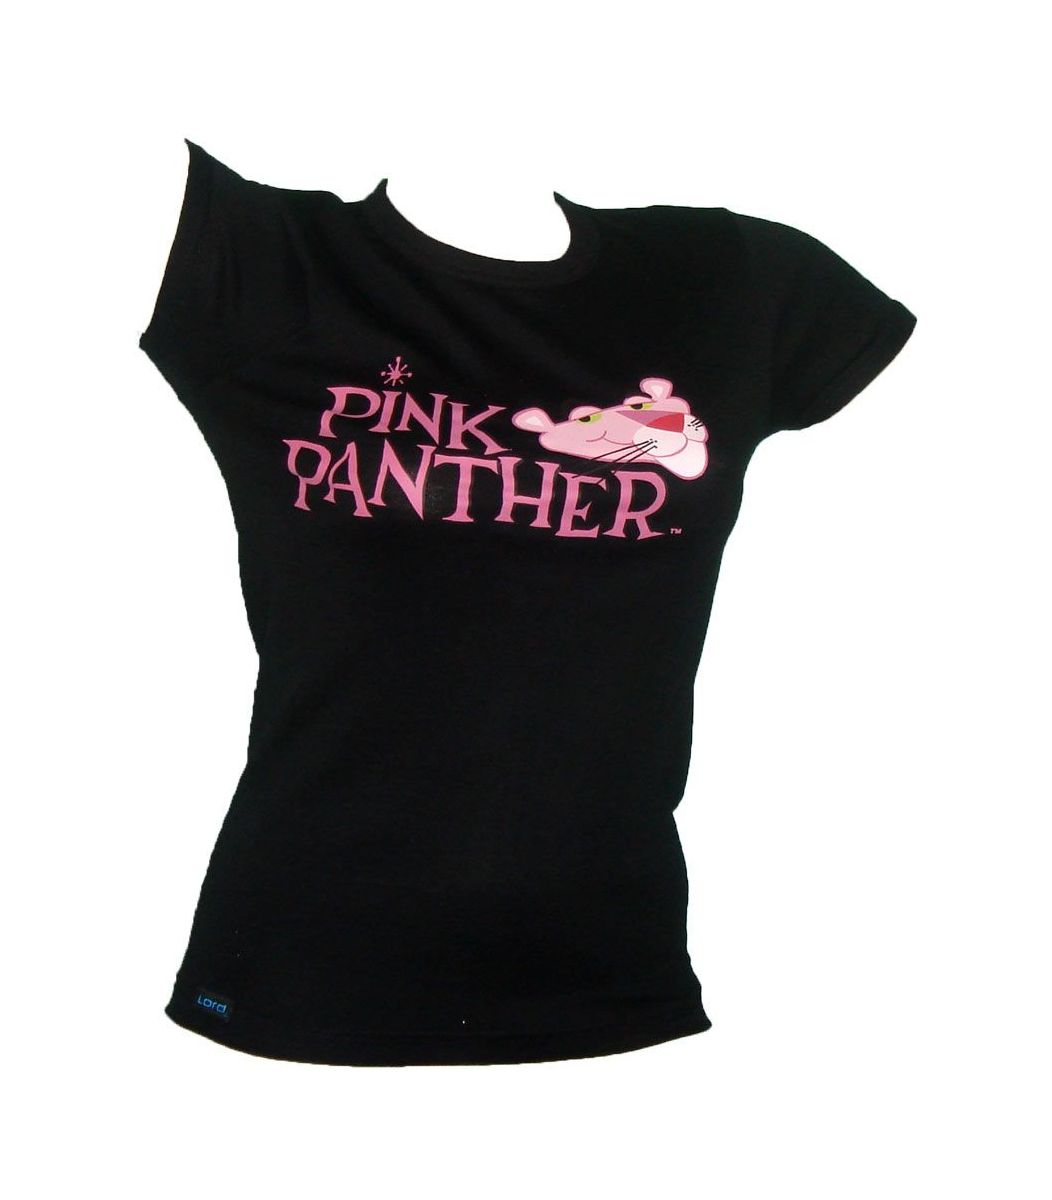  T-Shirt Short Sleeve Lord Offers copy of ΅Women T-Shirt Pink Panther 8509-4